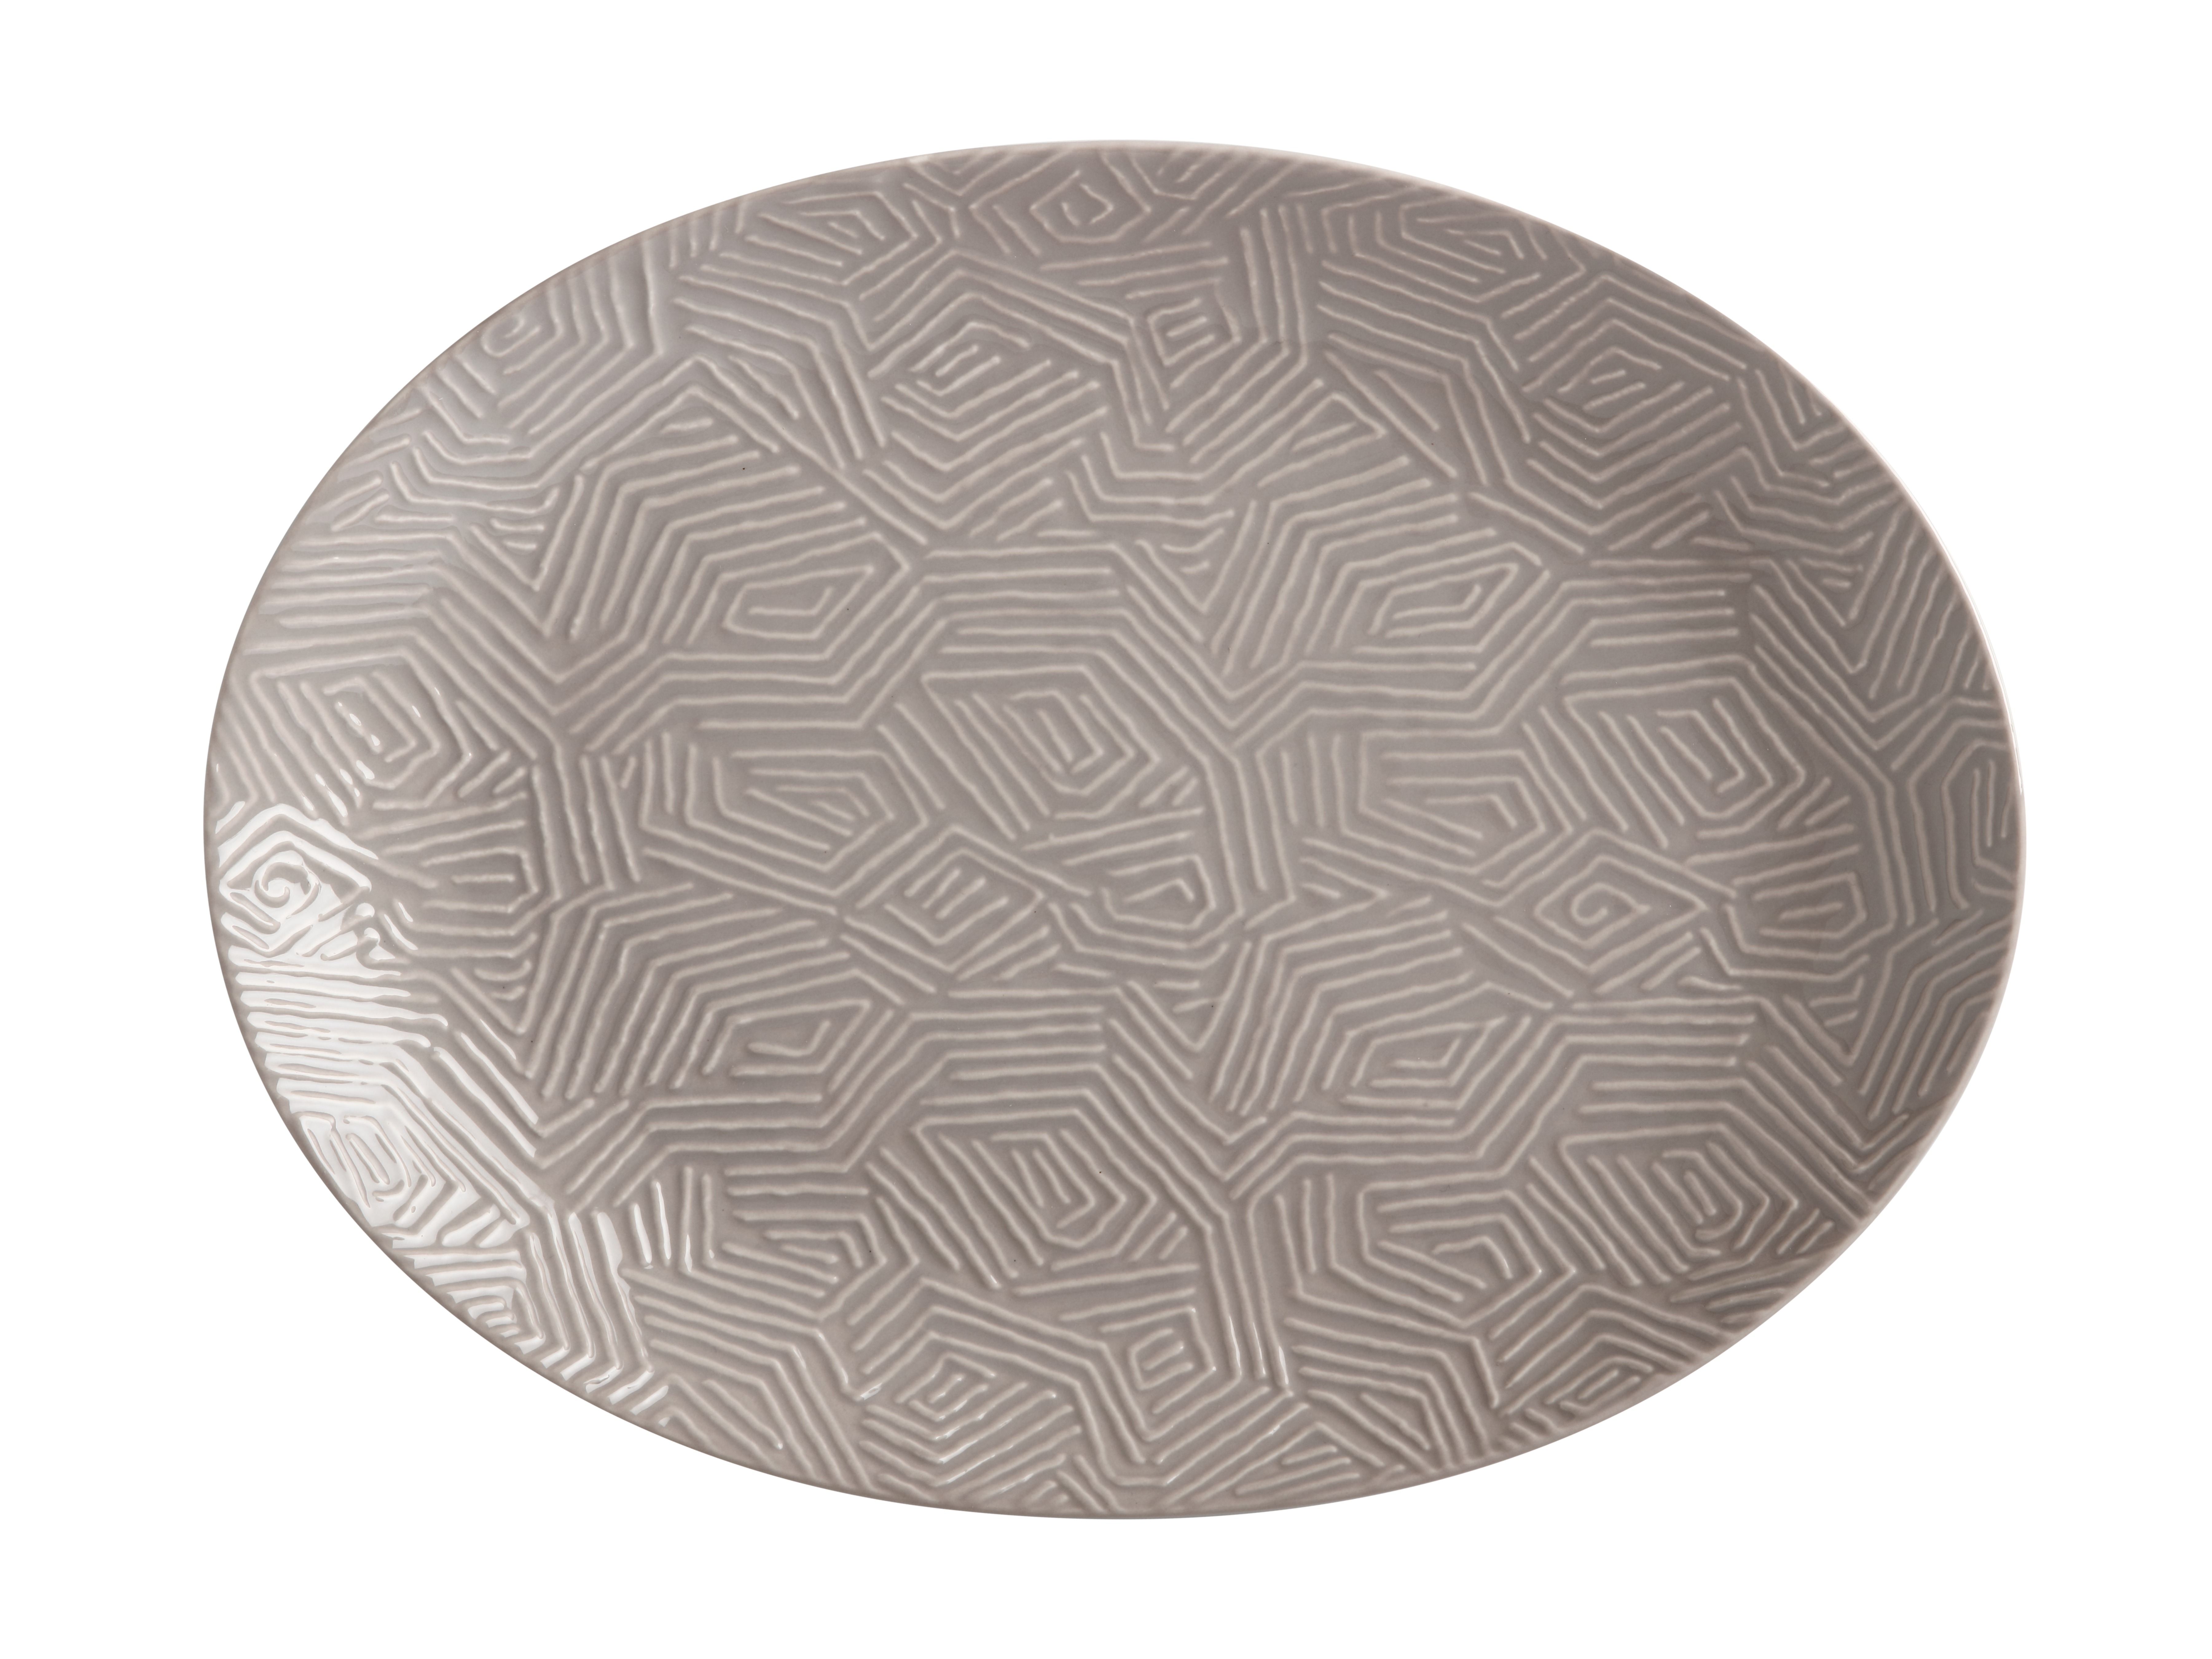 Maxwell Williams Dune Oval Platter 36x27cm Taupe